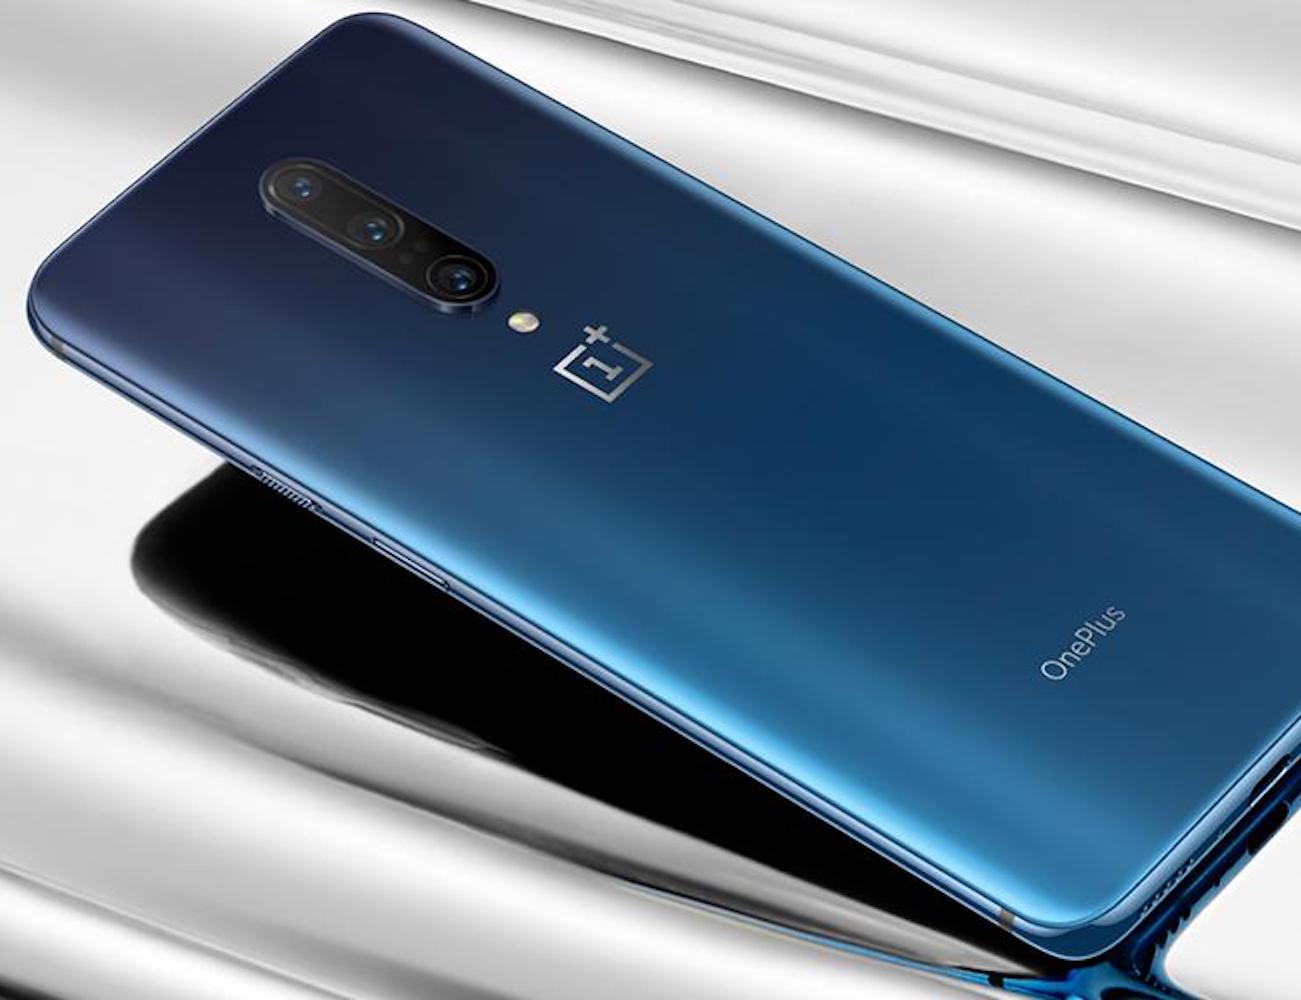 OnePlus 7 Pro Bezel-less Android Smartphone offers insanely fast charging